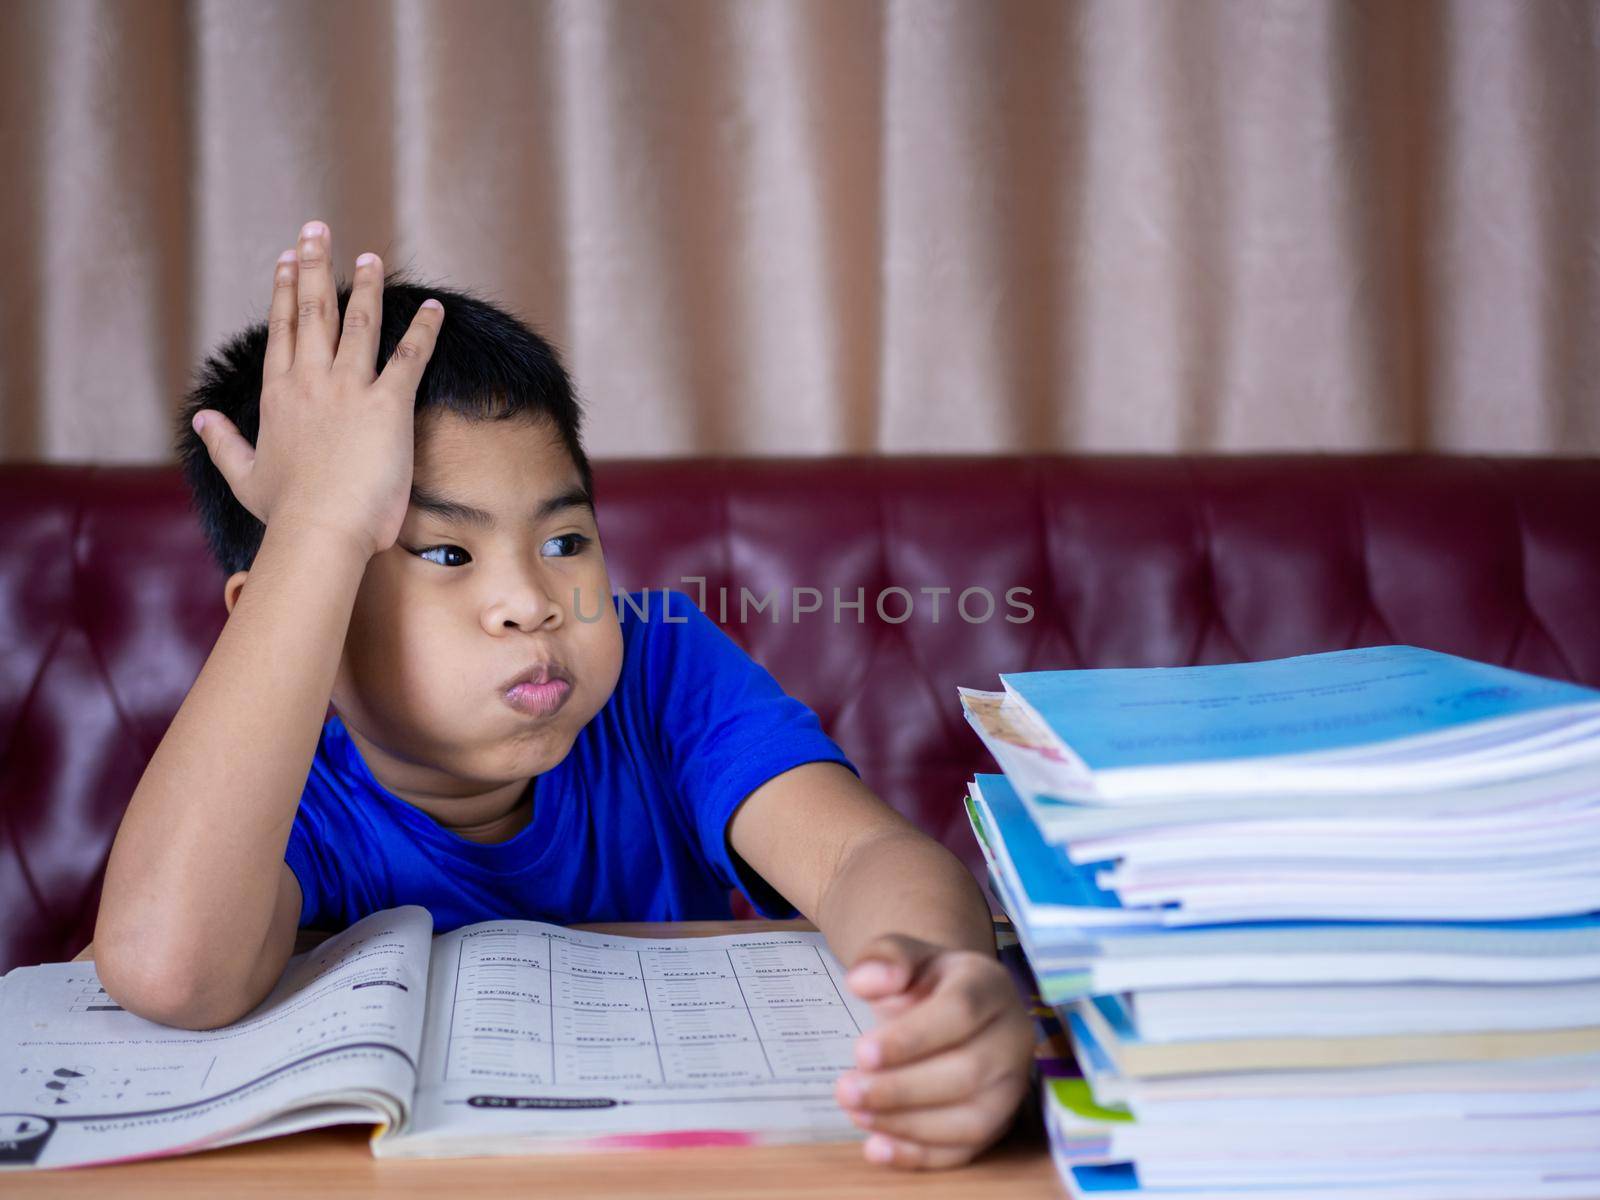 A boy is tired of reading a book on a wooden table. with a pile of books beside The background is a red sofa and cream curtains.